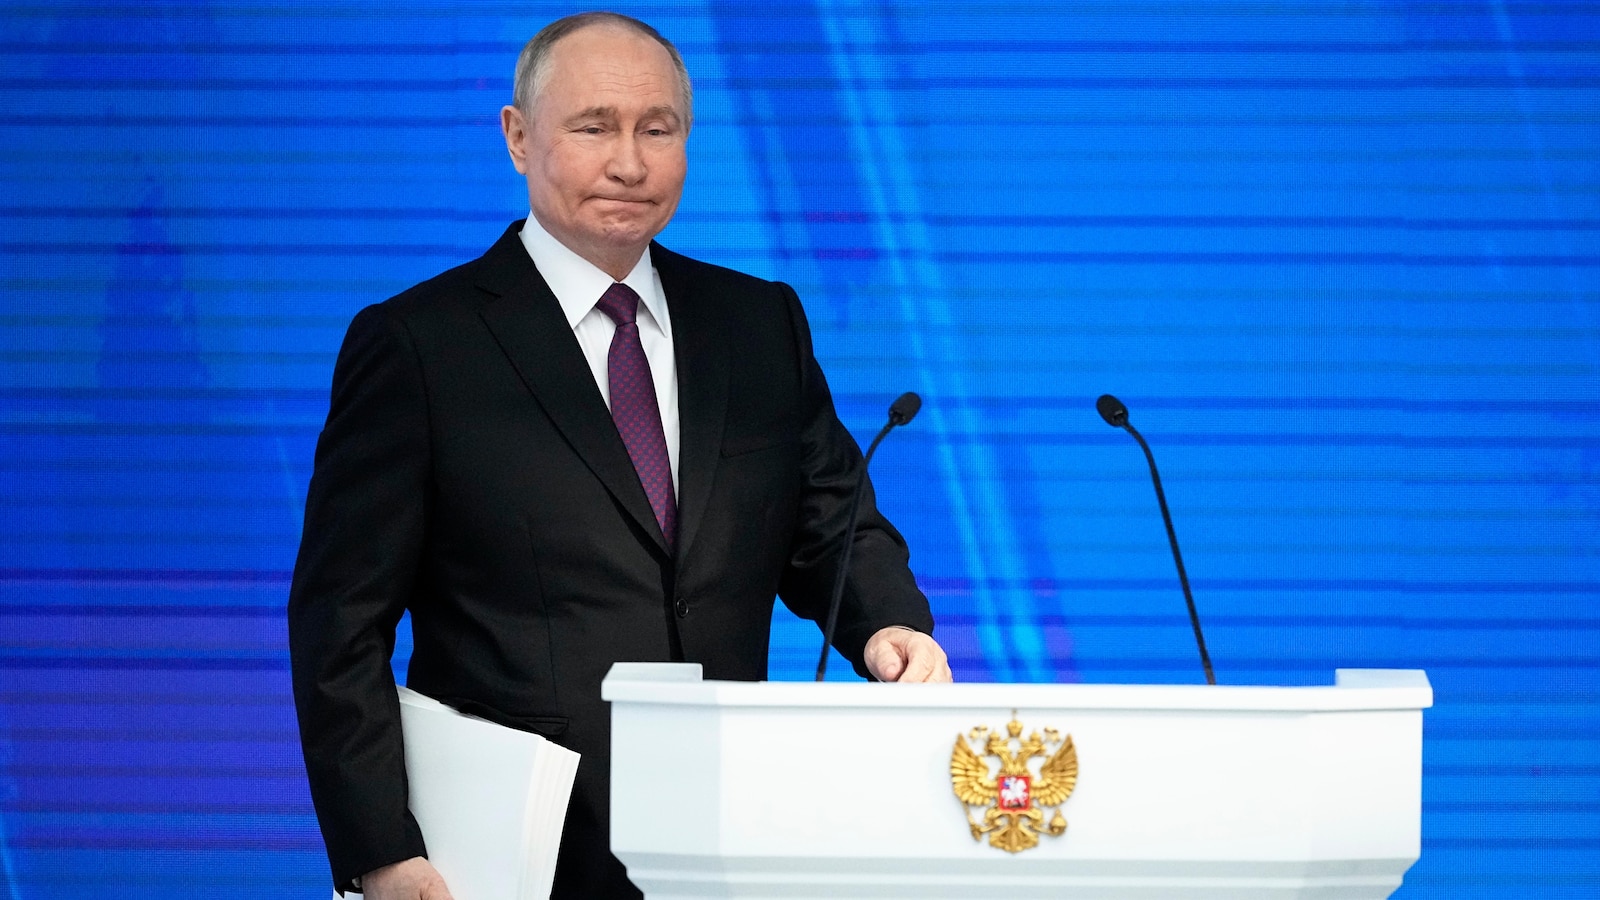 Warning from Putin: Deployment of Western troops in Ukraine could lead to a global nuclear conflict